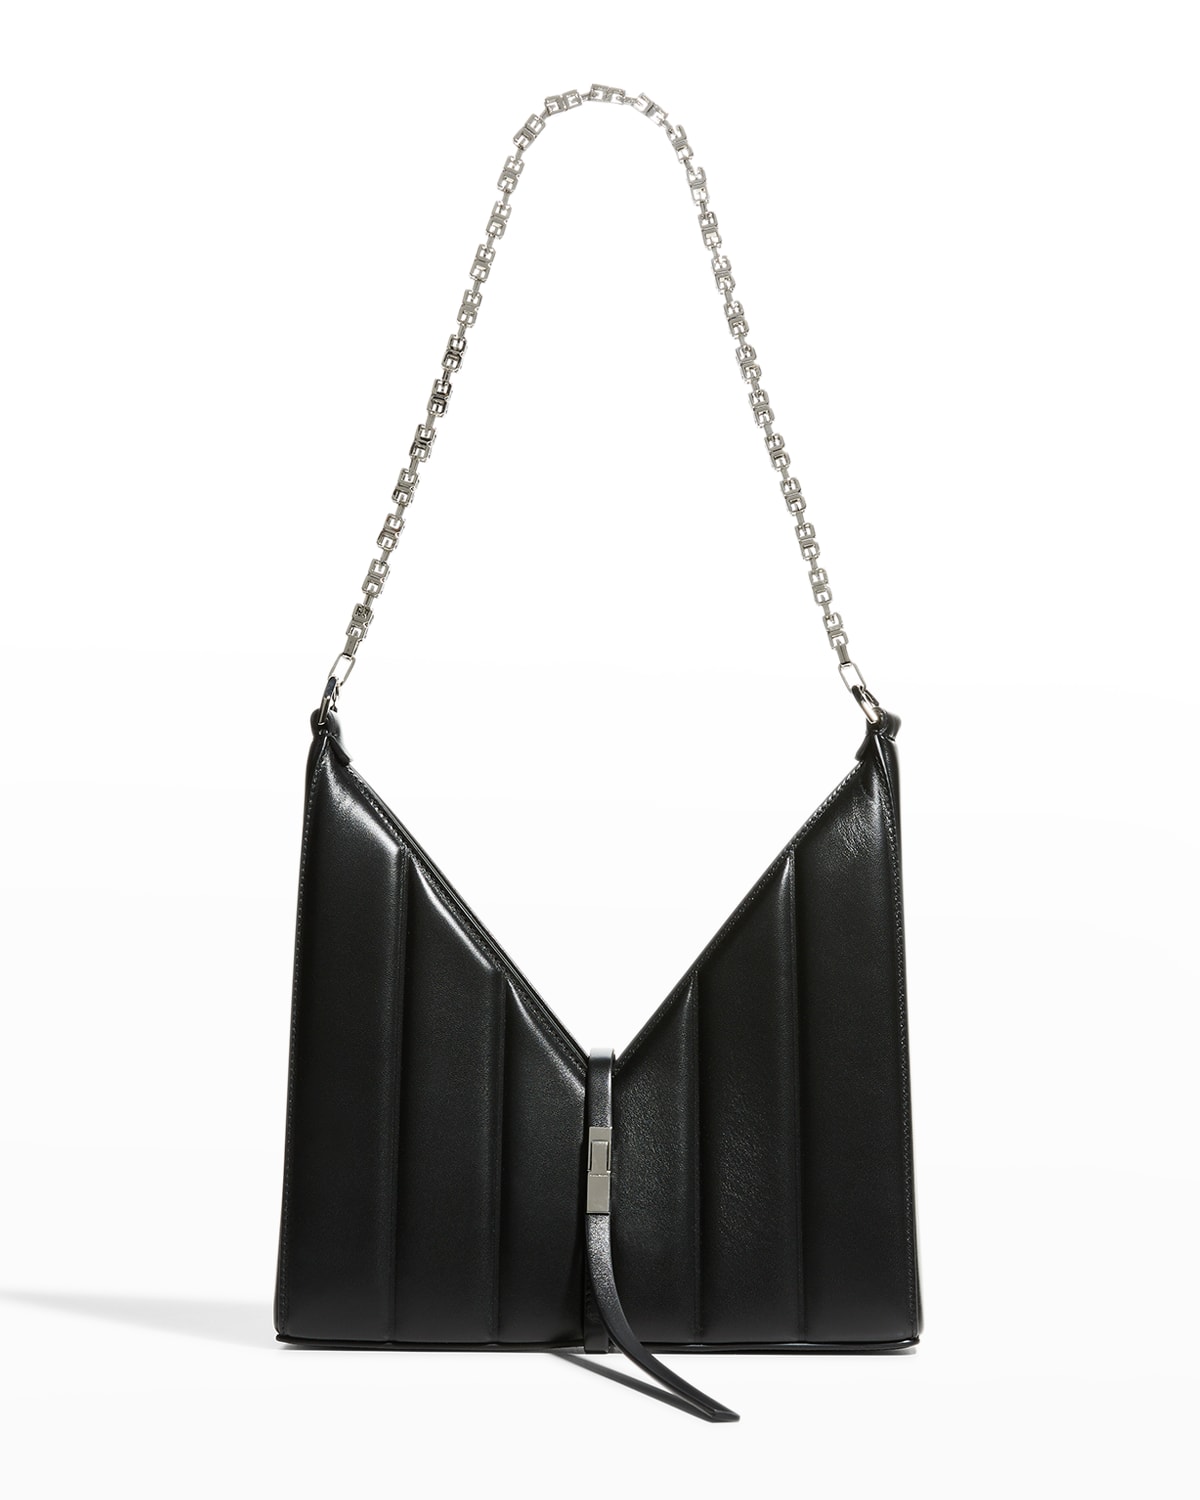 Givenchy Small Quilted Cutout Shoulder Bag in Leather with Chain Strap